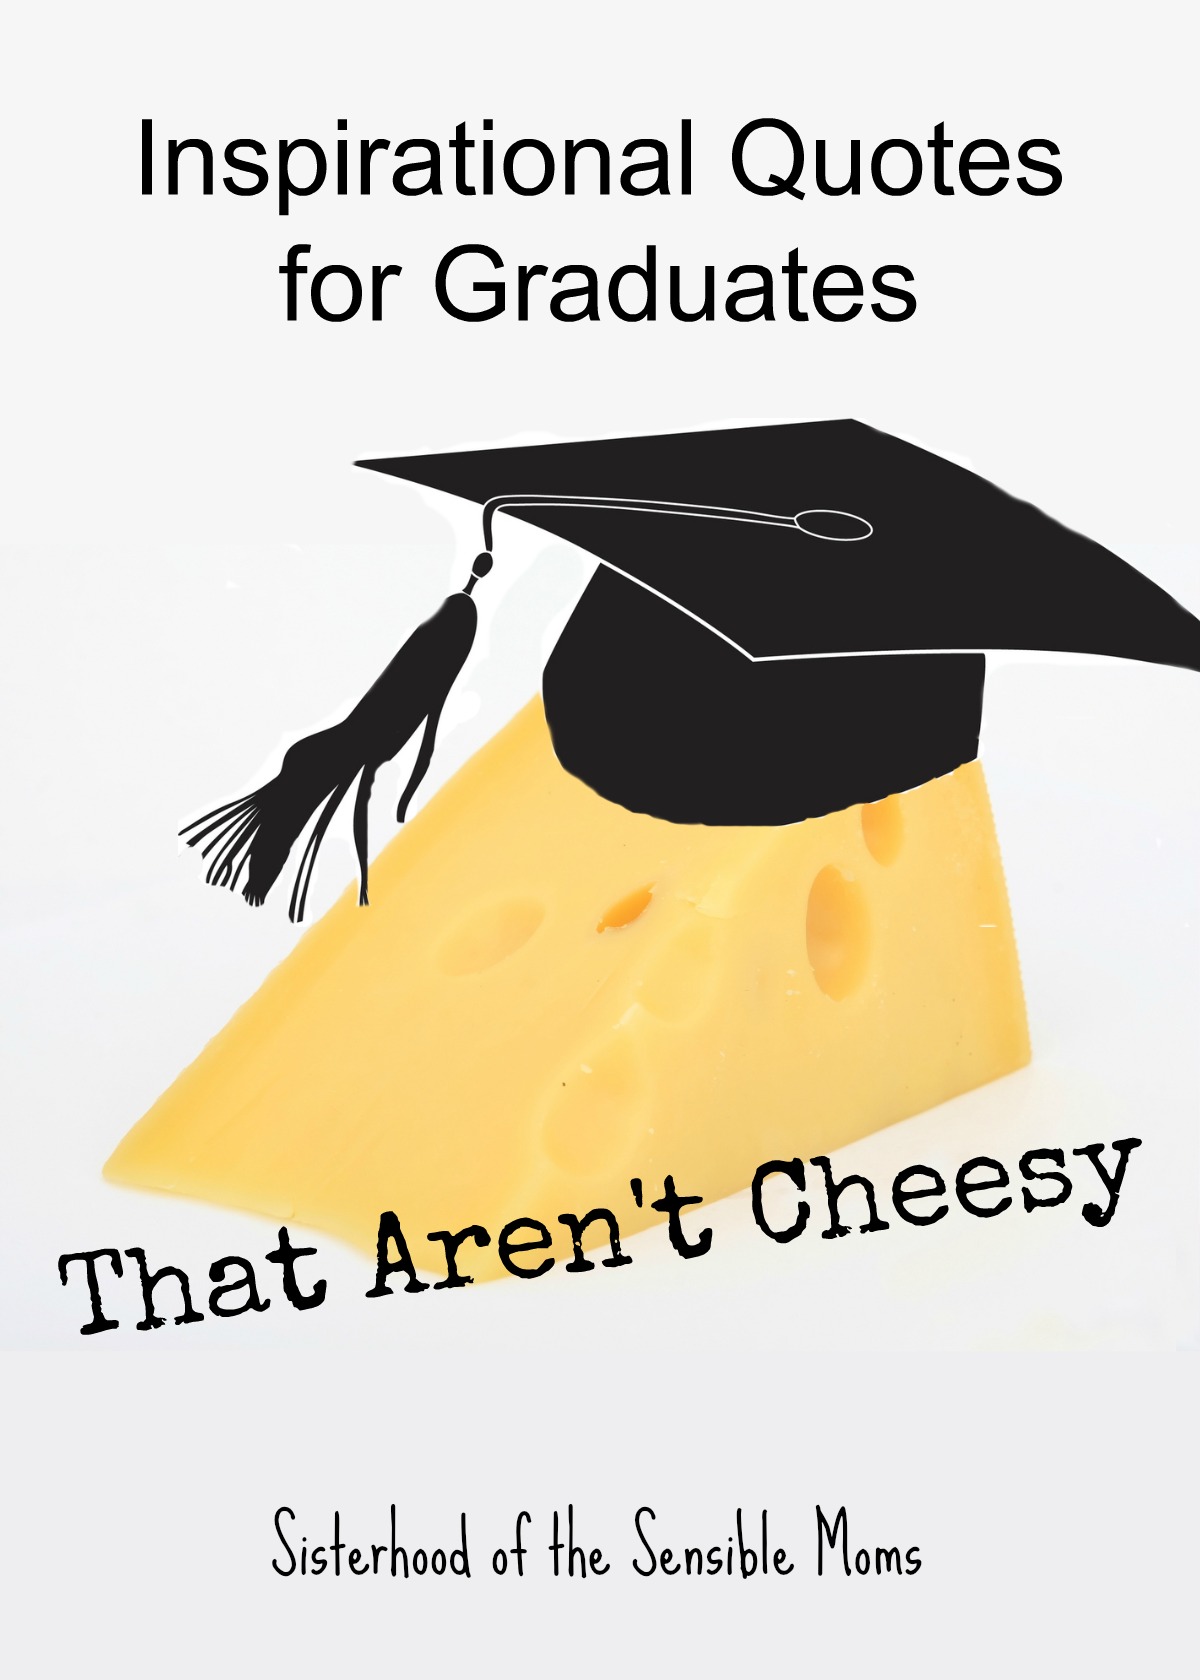 Inspirational Quotes for Graduates That Aren't Cheesy - Sisterhood of